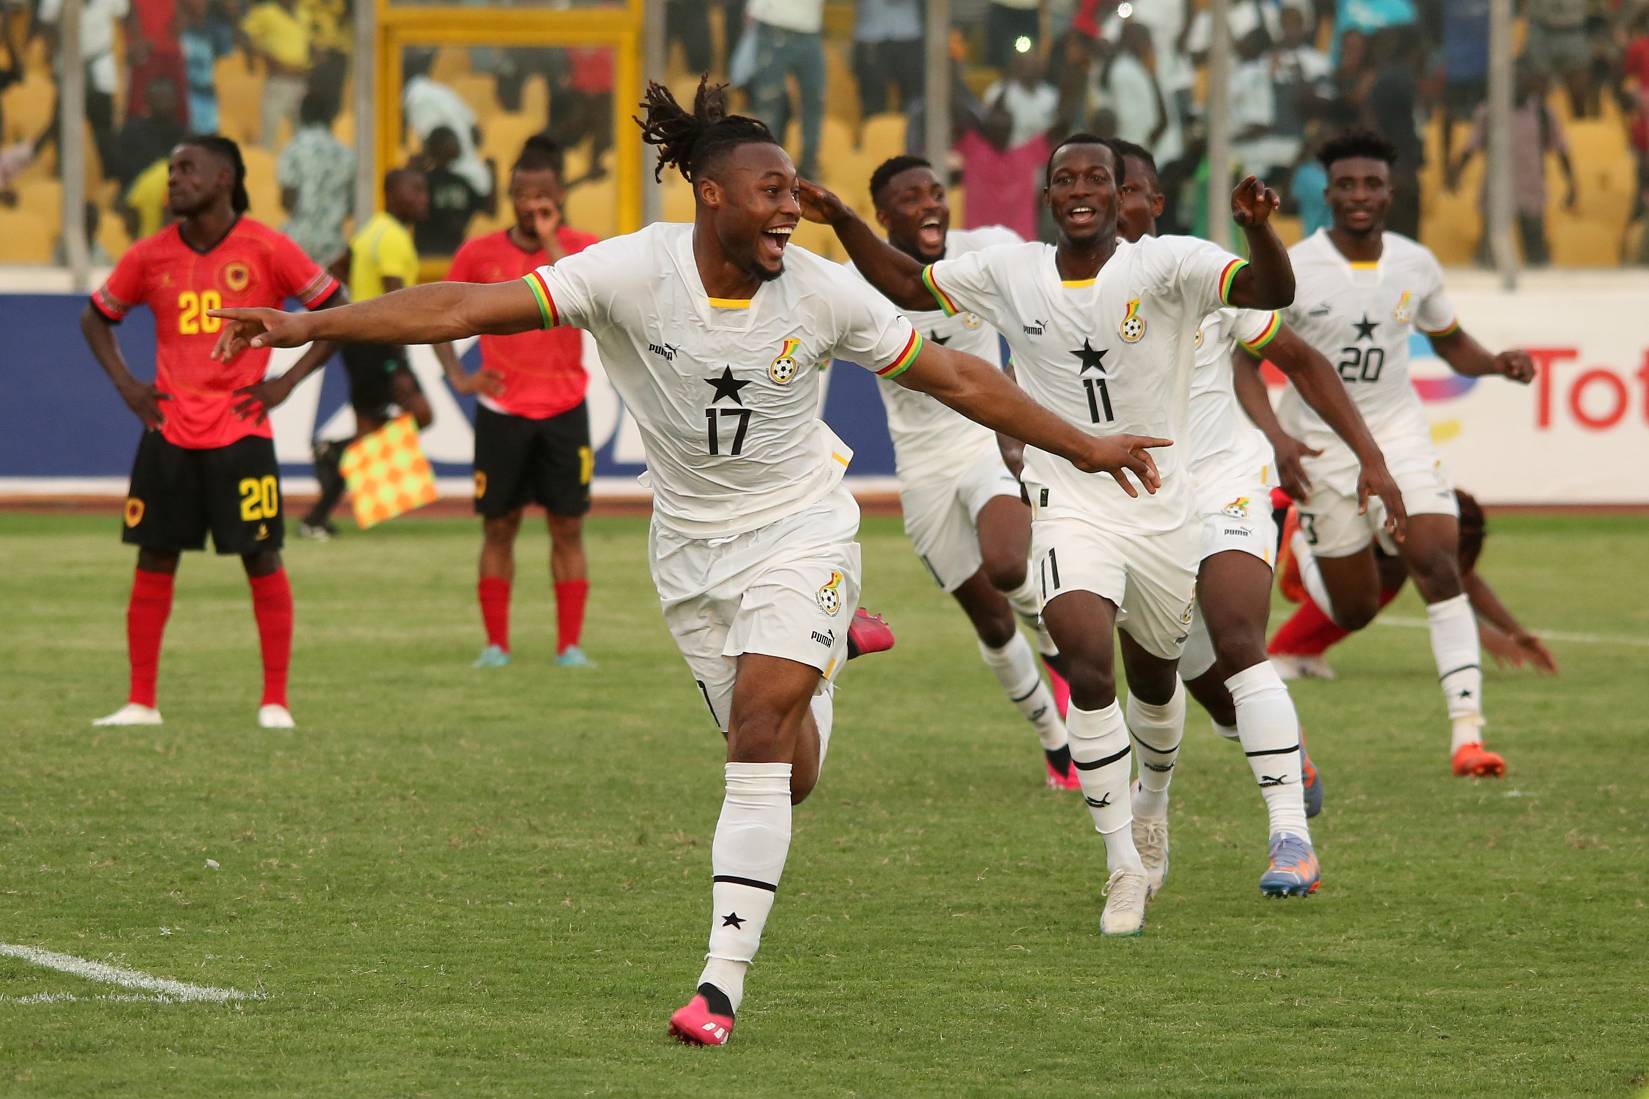 Madagascar-Ghana clash: Five key players who missed Hughton’s squad due to injury